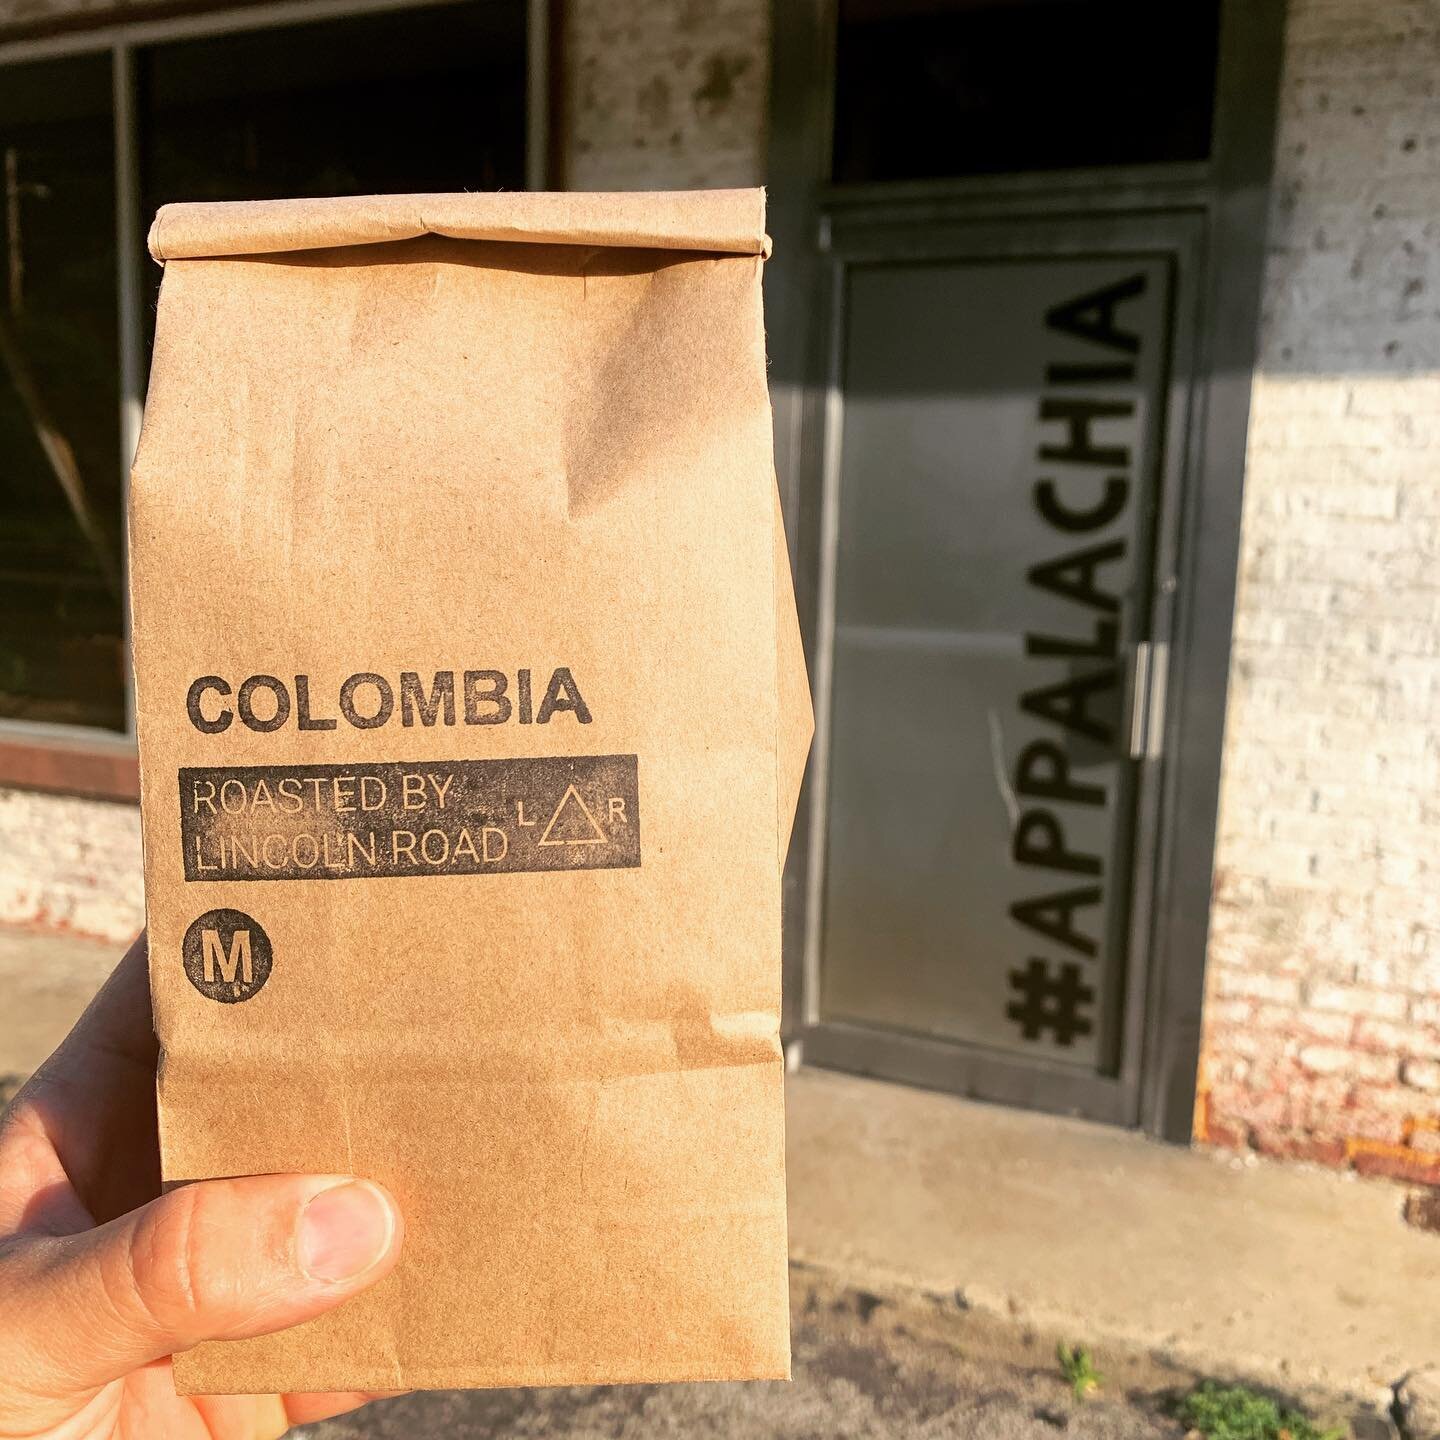 An absolute beautiful morning here at the roastery ☀️ first cup of Lincoln Road Colombian roast down - anybody else? And yes, I said &ldquo;first&rdquo; cup because it&rsquo;s certainly not my last today ☕️ 😎 #DoGoodThings #LincolnRoadRoastery #Appa